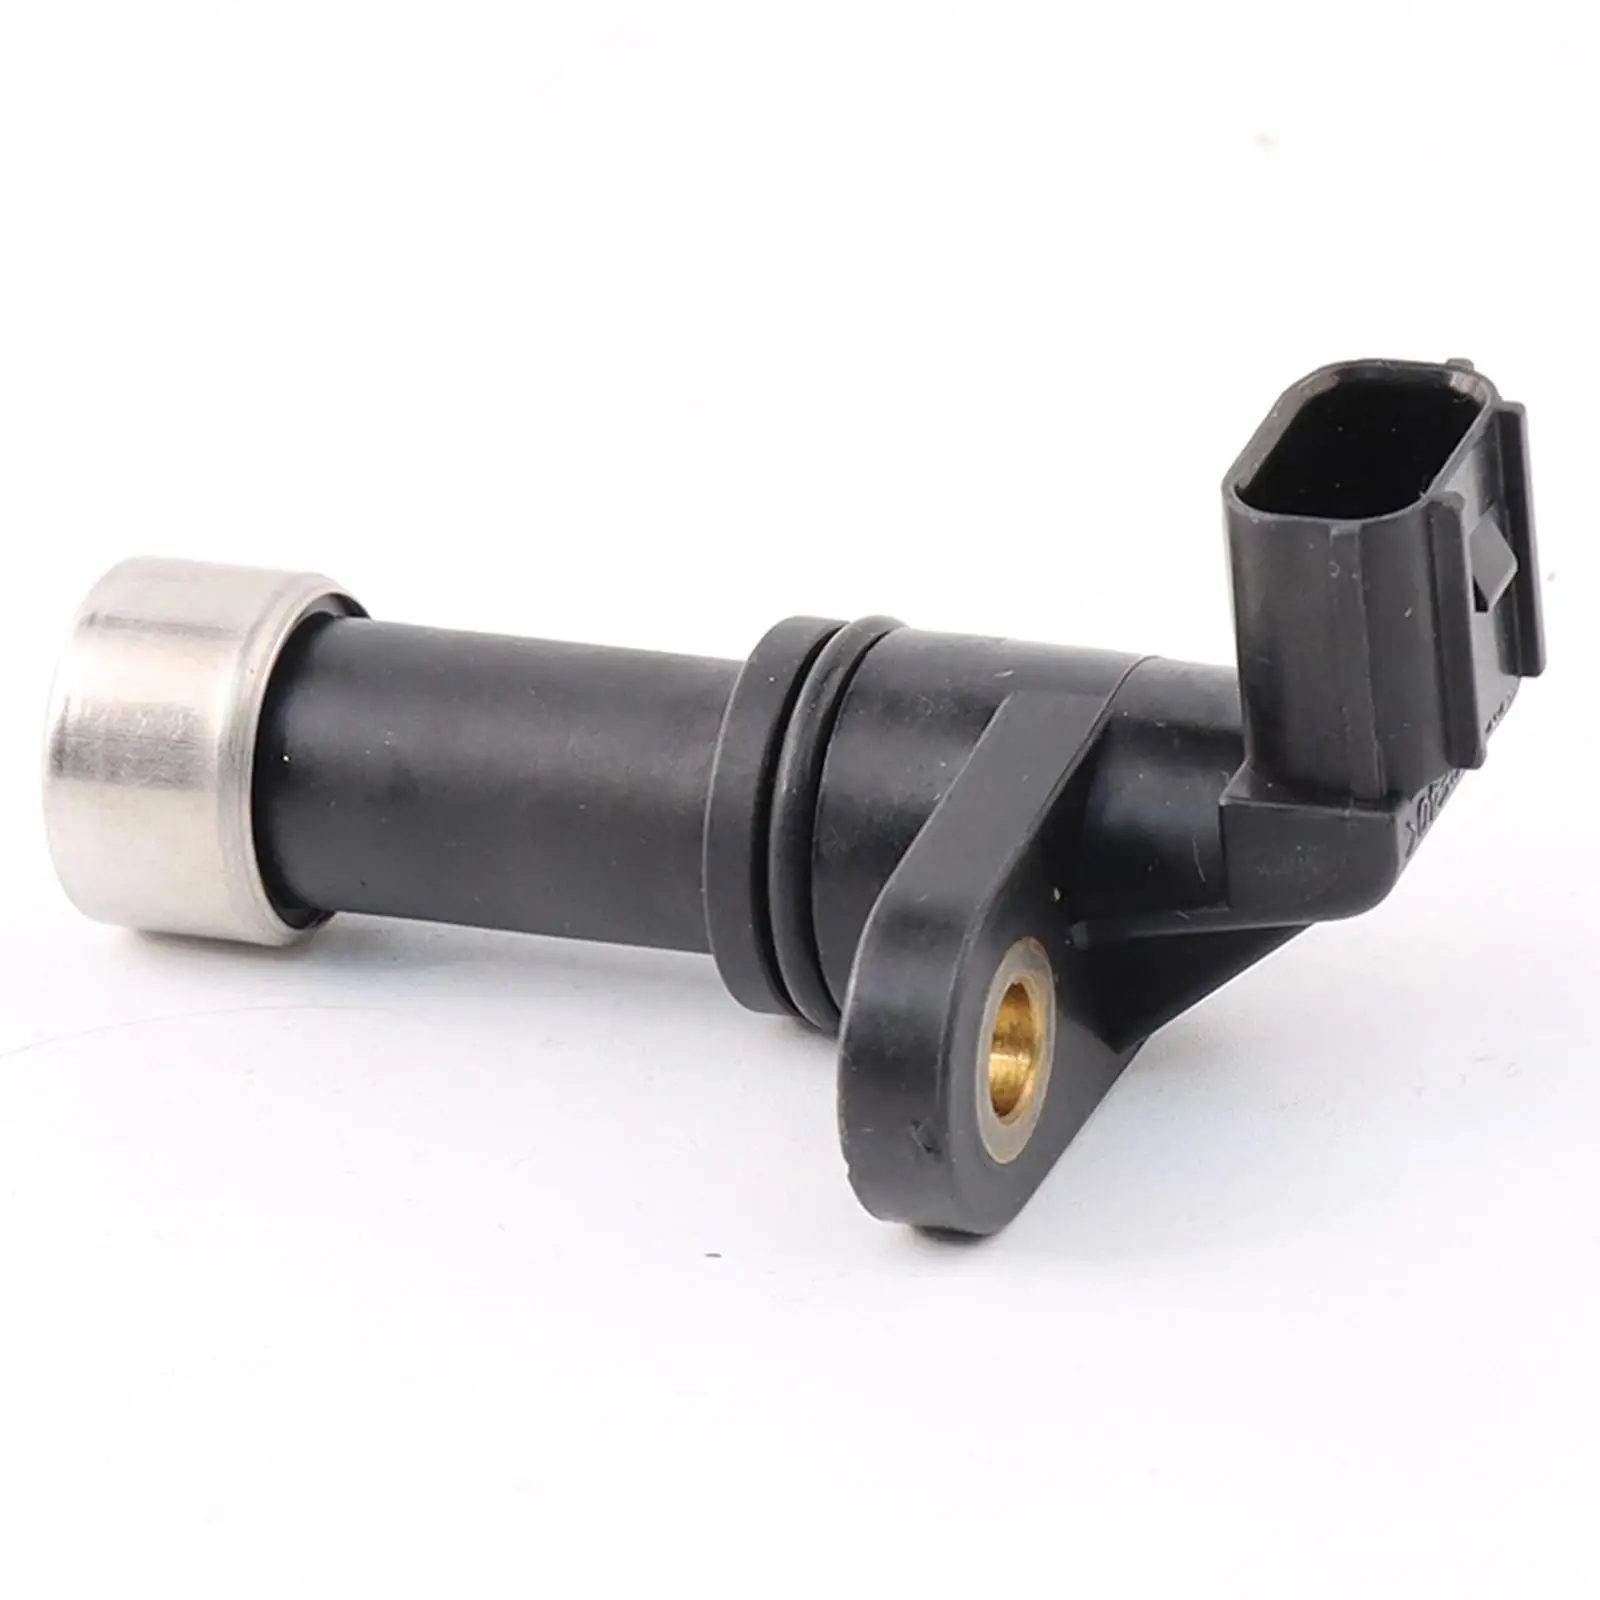 Trans Speed Sensor 28810-Rpc-003 for Honda Civic Fit Replace Parts Easy Installation